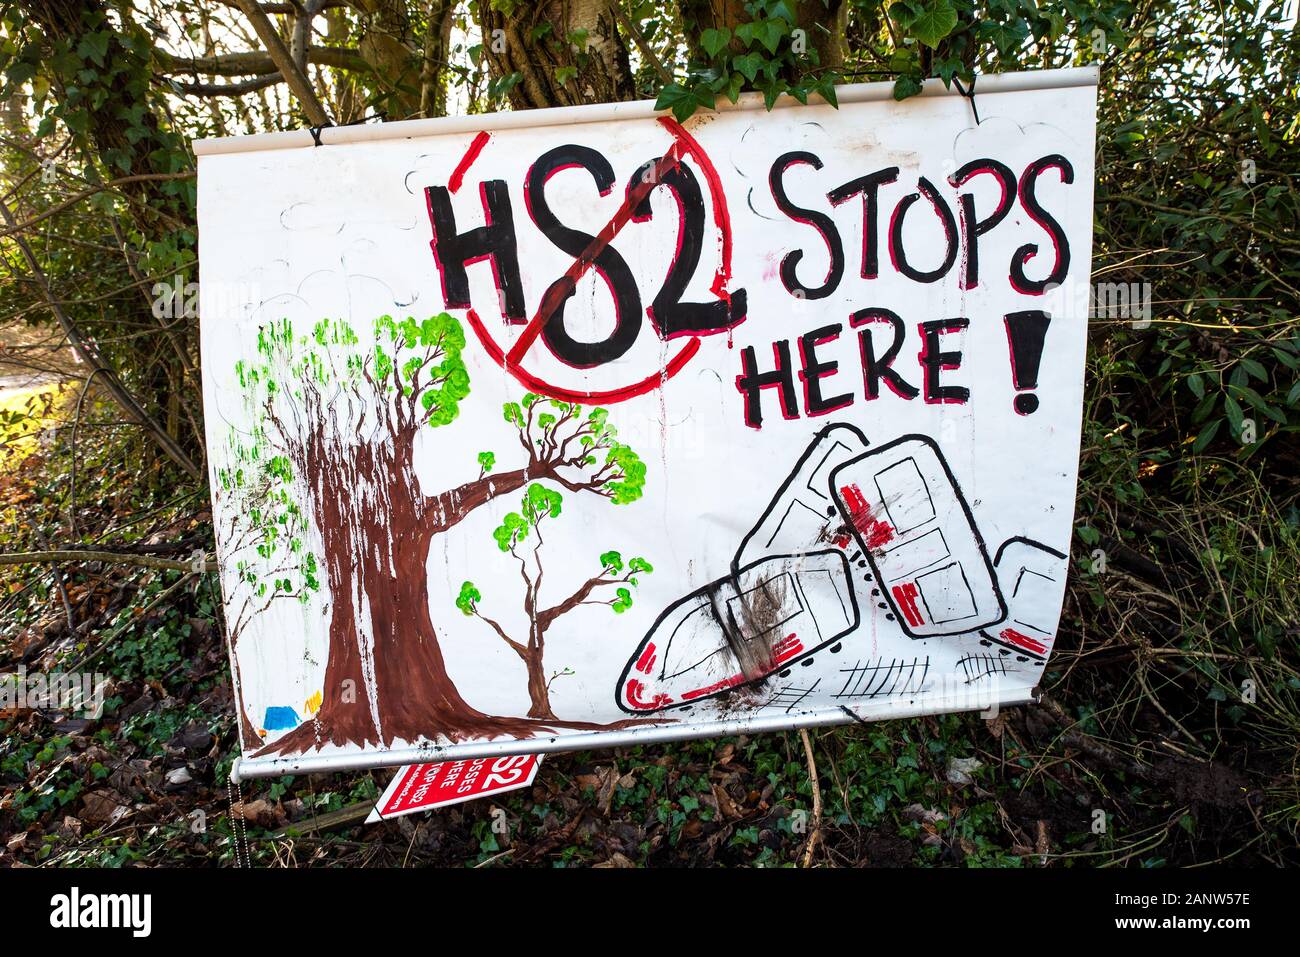 Wendover, Buckinghamshire, UK.18th January 2020. Determined campaigners opposing HS2 recently established the Wendover Active Resistance Camp in woodland south of Wendover adjacent to the the A413. The camp is in the path of the proposed HS2 rail line where it would cross the A413. The Wendover Active Resistance Camp intend to occupy their site for as long as possible, opposing the construction of the HS2 rail line. Placards warn passing motorists that the HS2 rail line will cross here, and a banner indicates HS2 will be stopped here. Credit: Stephen Bell/Alamy Stock Photo